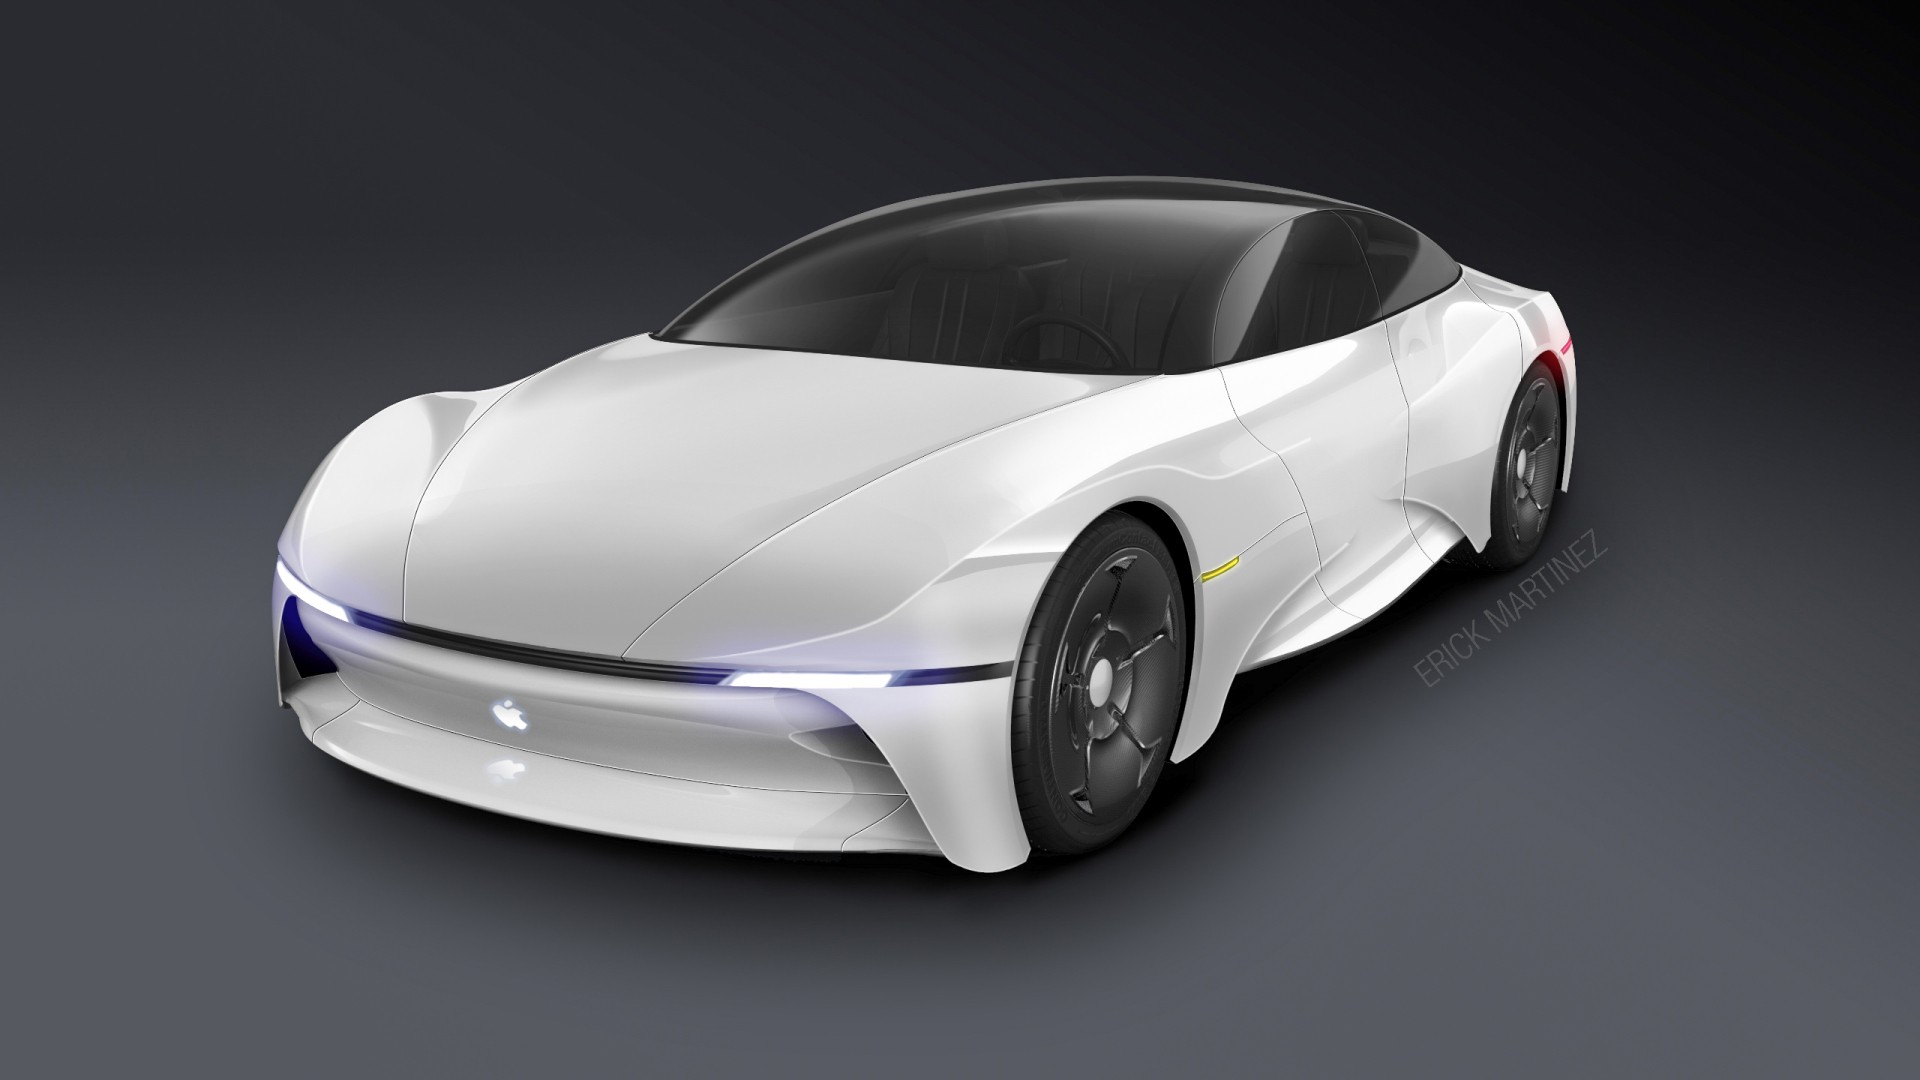 Project Titan Apple Car Now Expected To Launch In 2025 2027 At The Earliest 6 